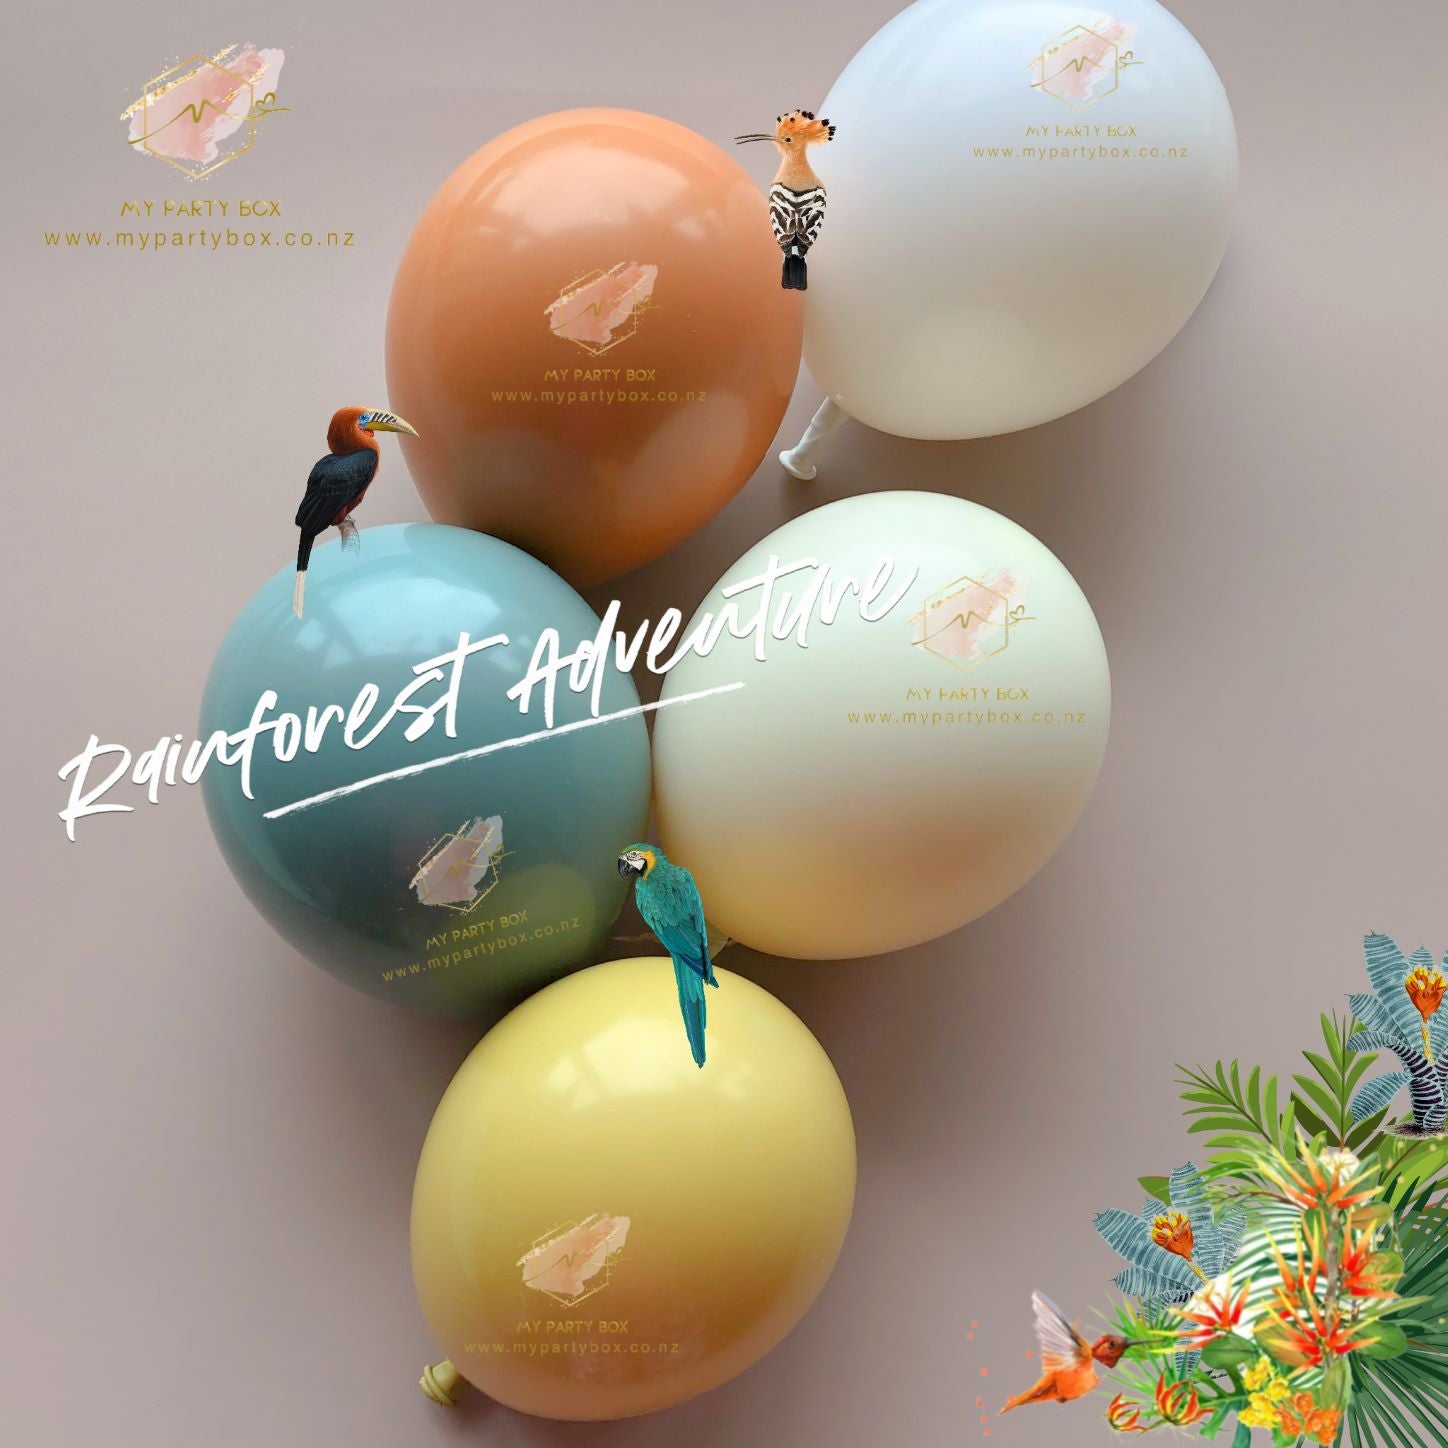 My Party Box Luxe Rainforest Adventure Balloon Garland DIY Kit with Bright Orange, Bright Mustard, Solid Willow, yellow, and White sand latex balloon